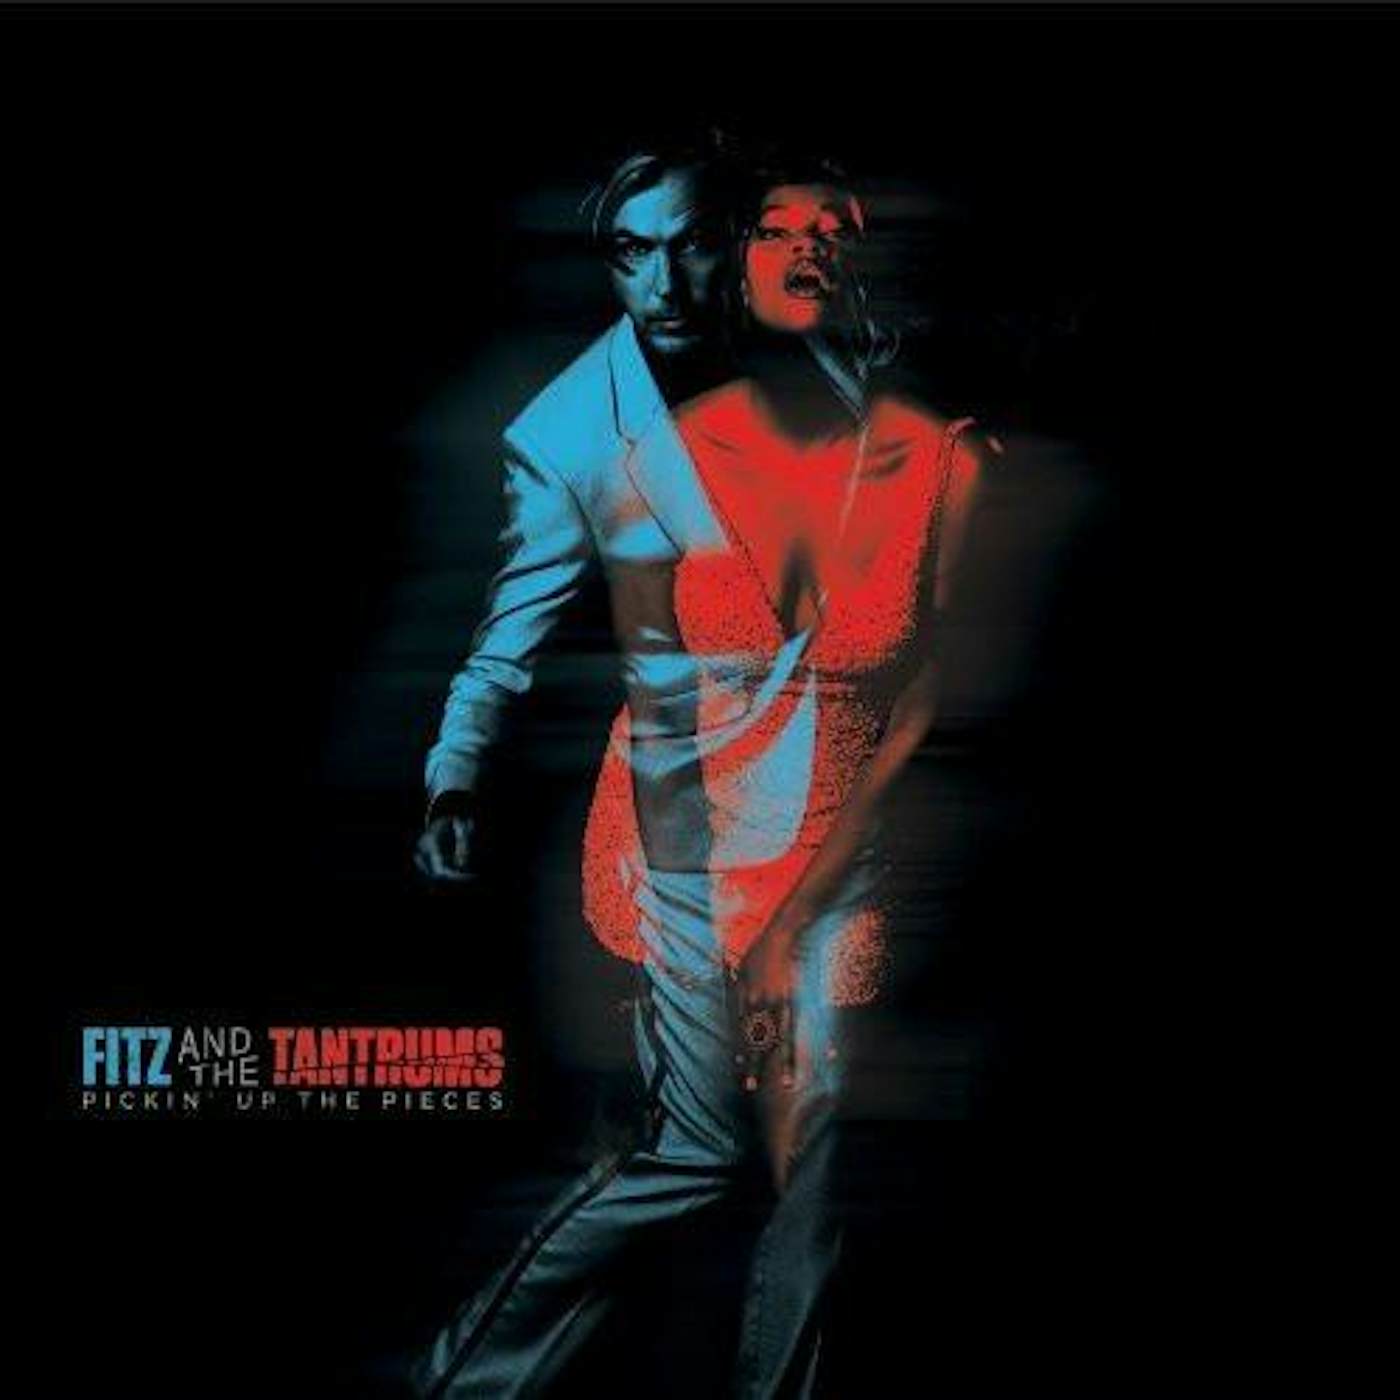 Fitz and The Tantrums PICKIN UP PIECES Vinyl Record